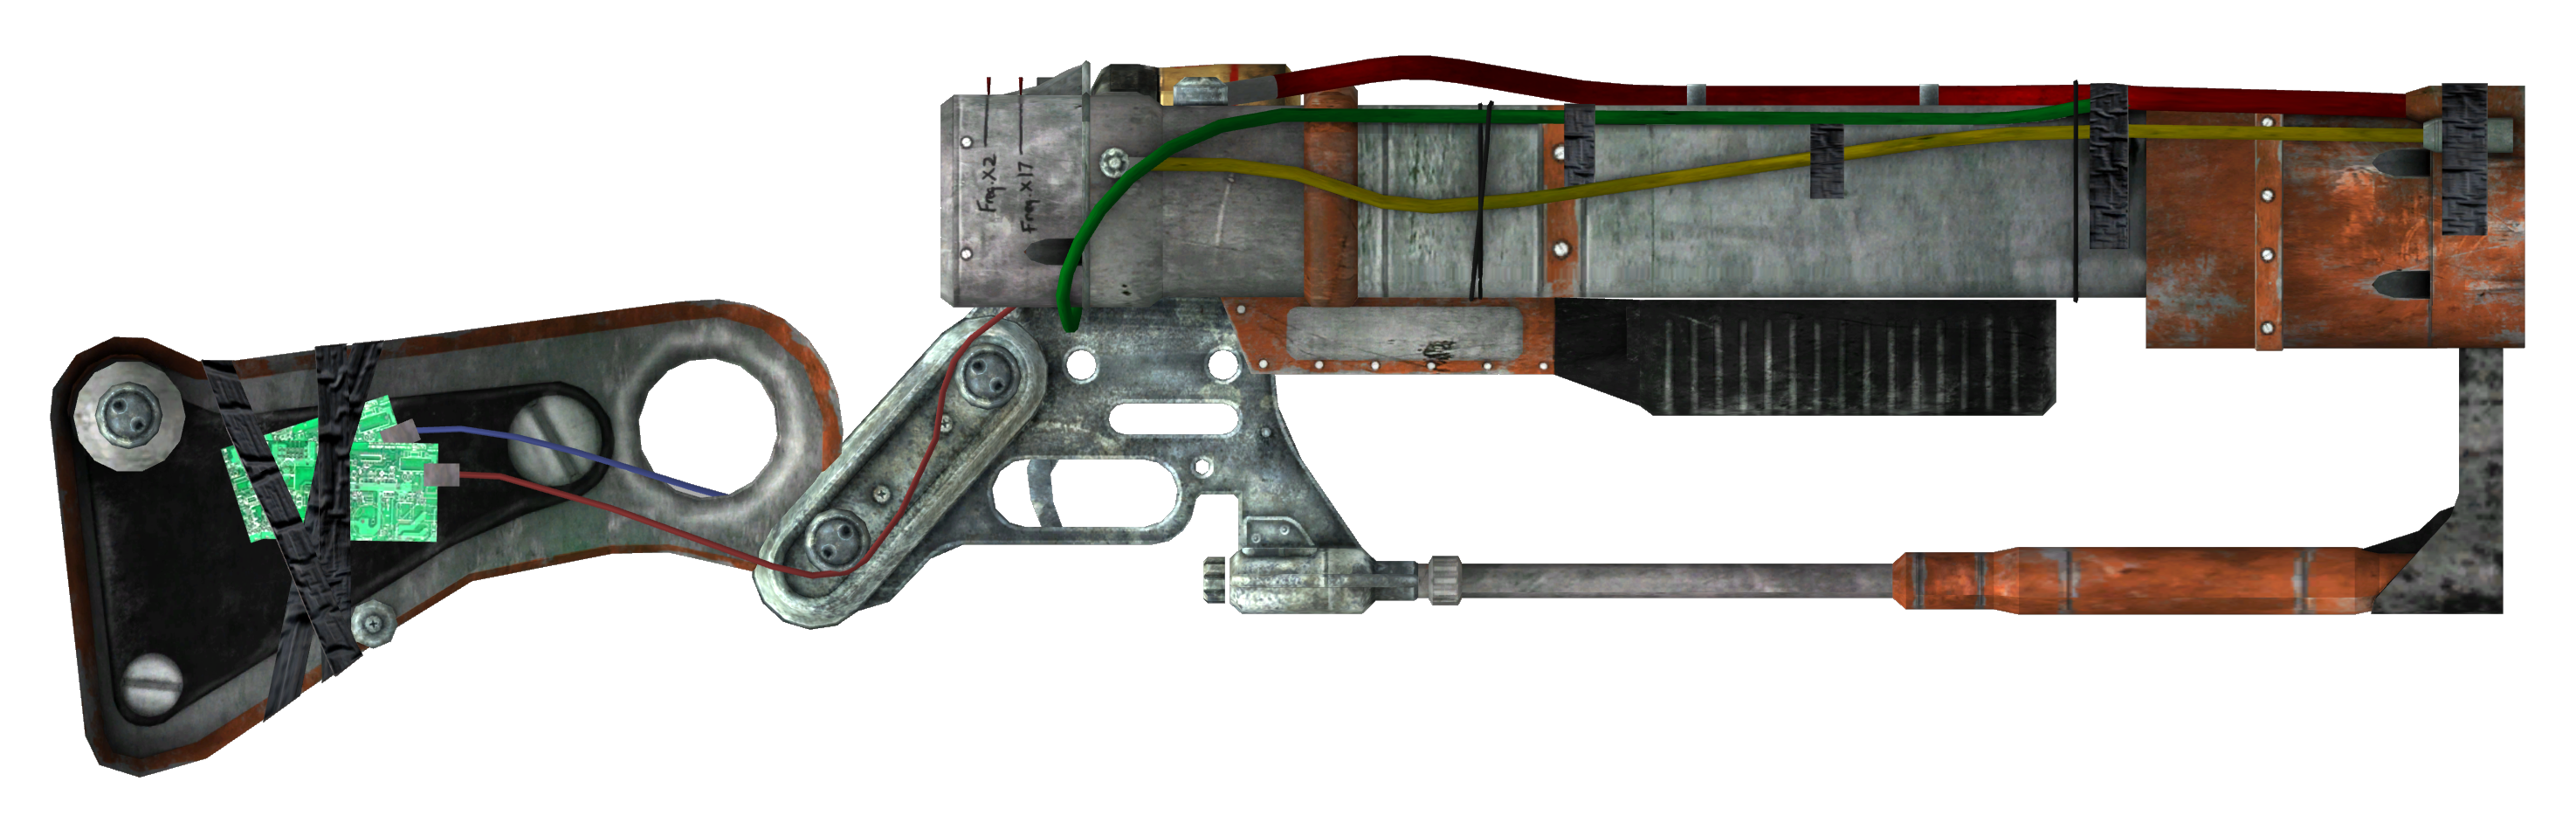 fallout new vegas laser weapons